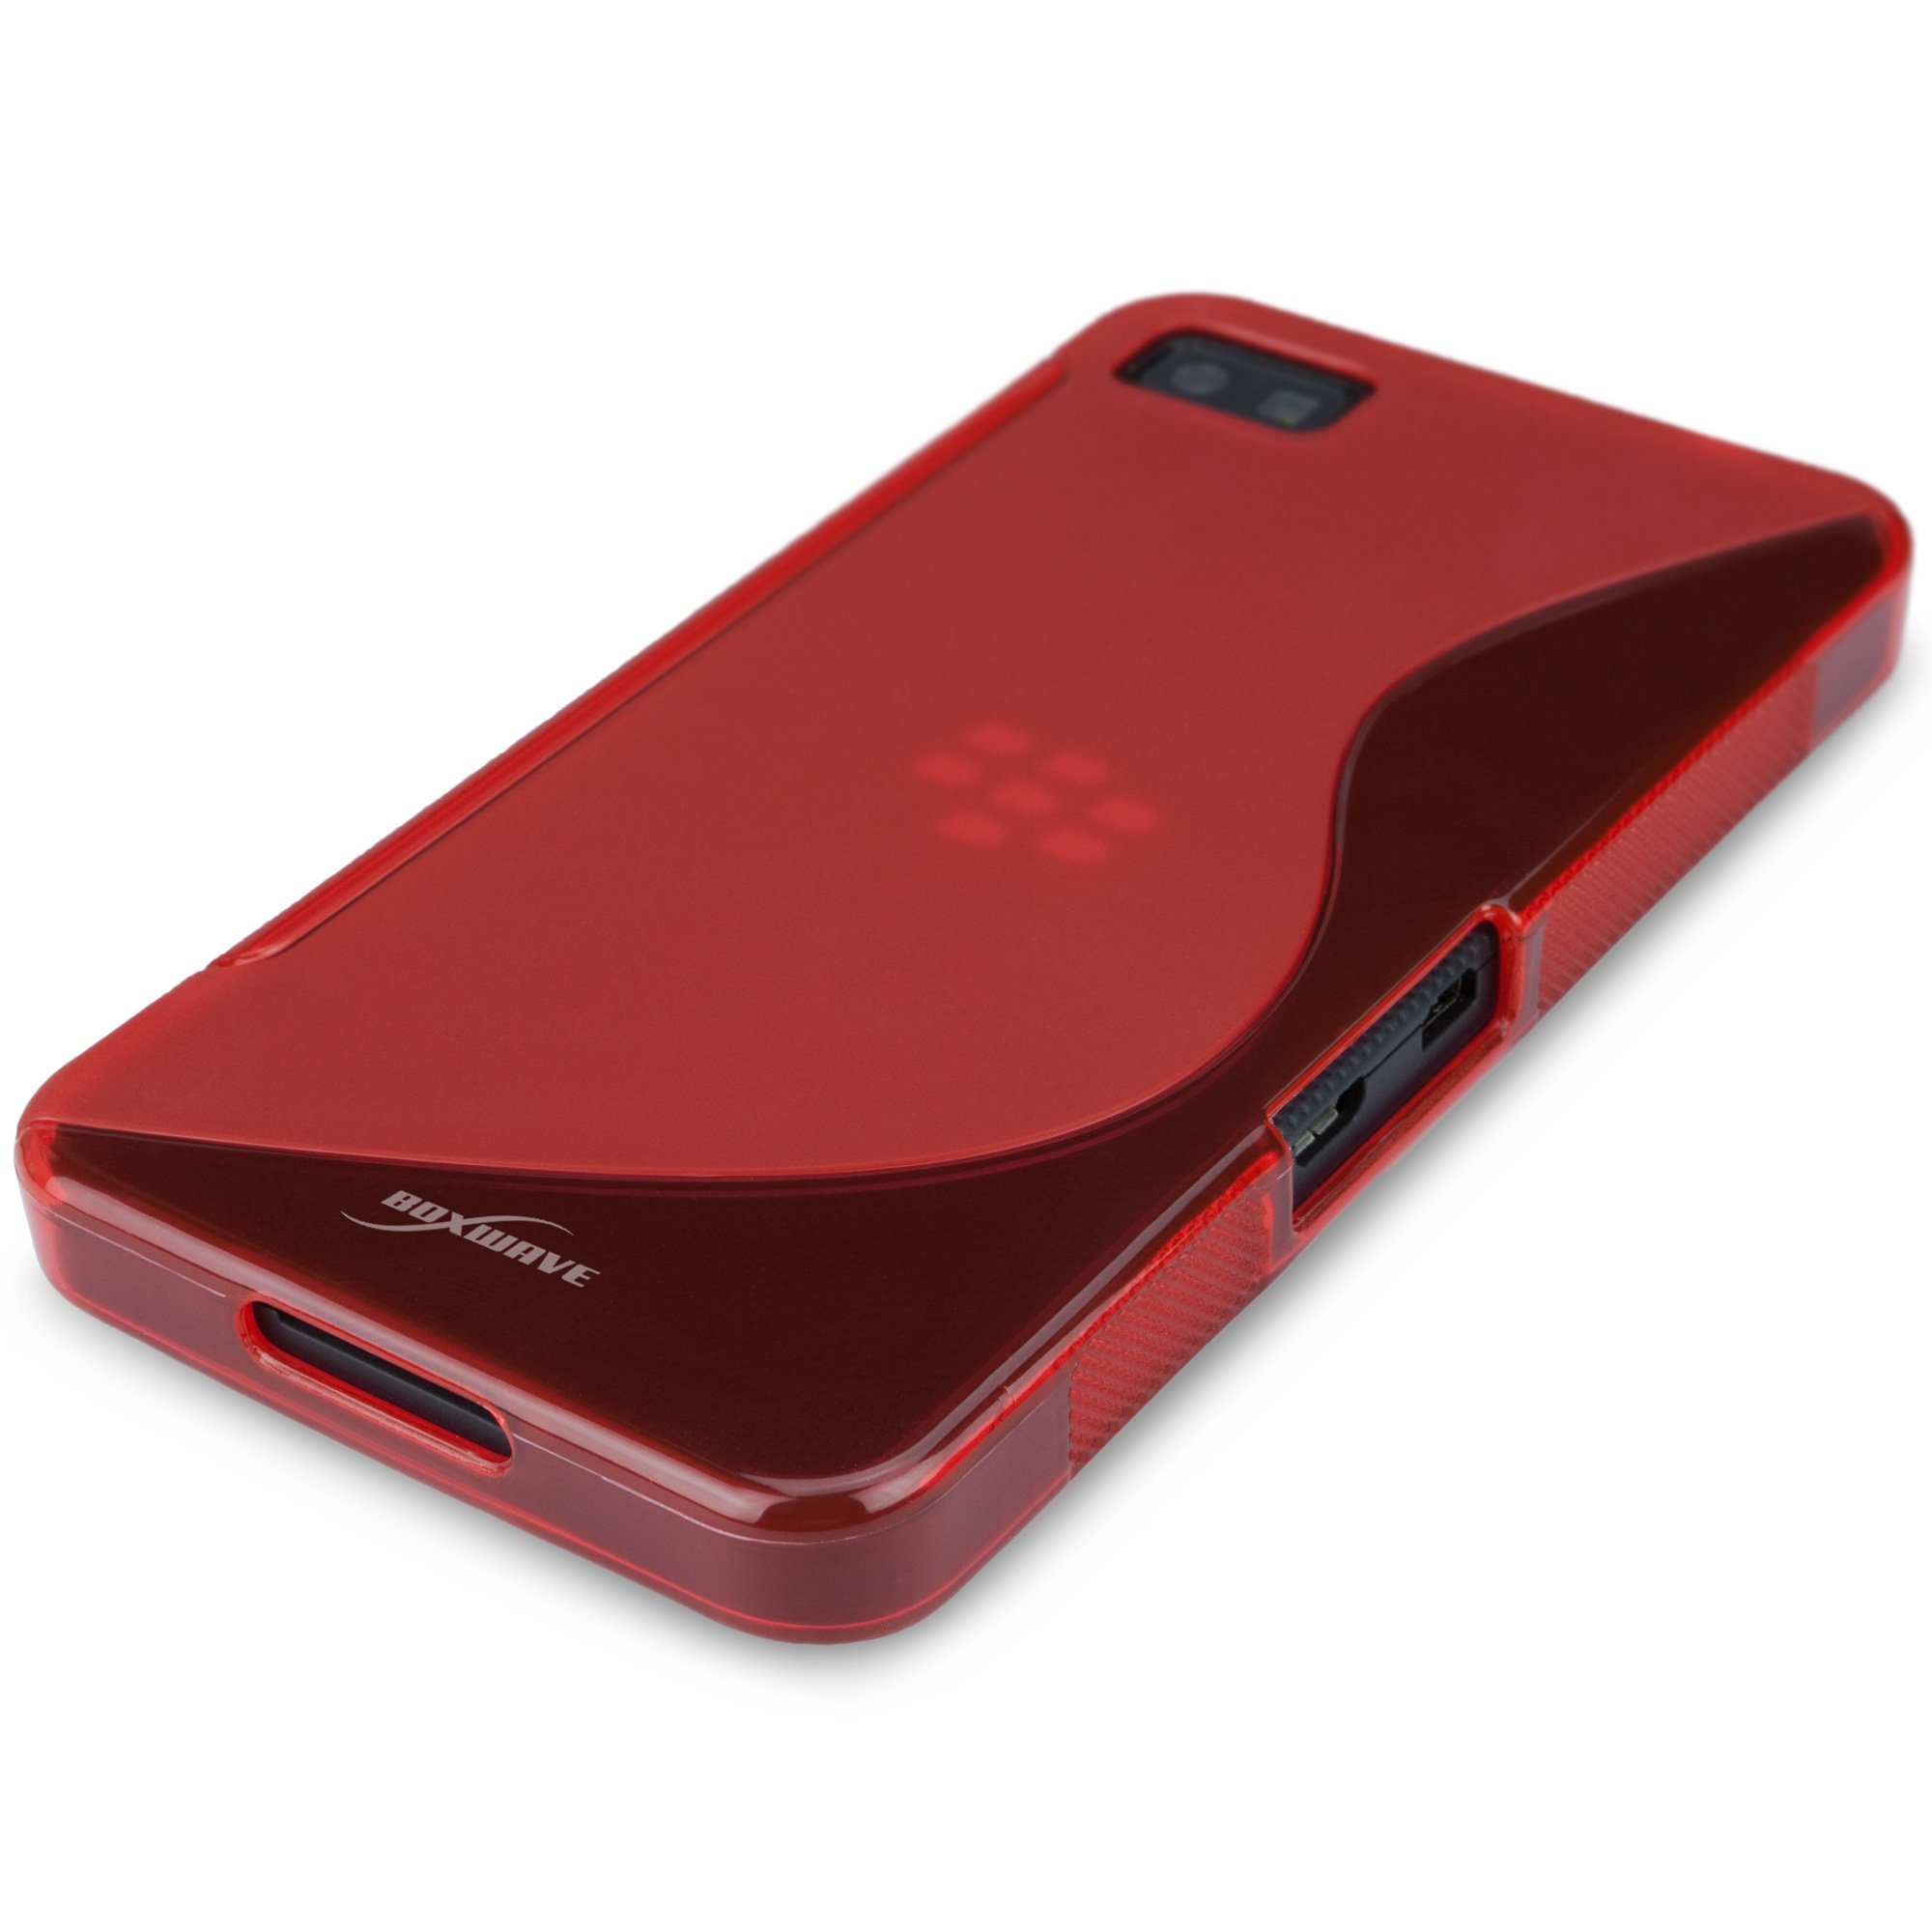 Case for BlackBerry Z10 (Case by BoxWave) - DuoSuit, Ultra Durable TPU Case w/Shock Absorbing Corners for BlackBerry Z10 - Scarlet Red